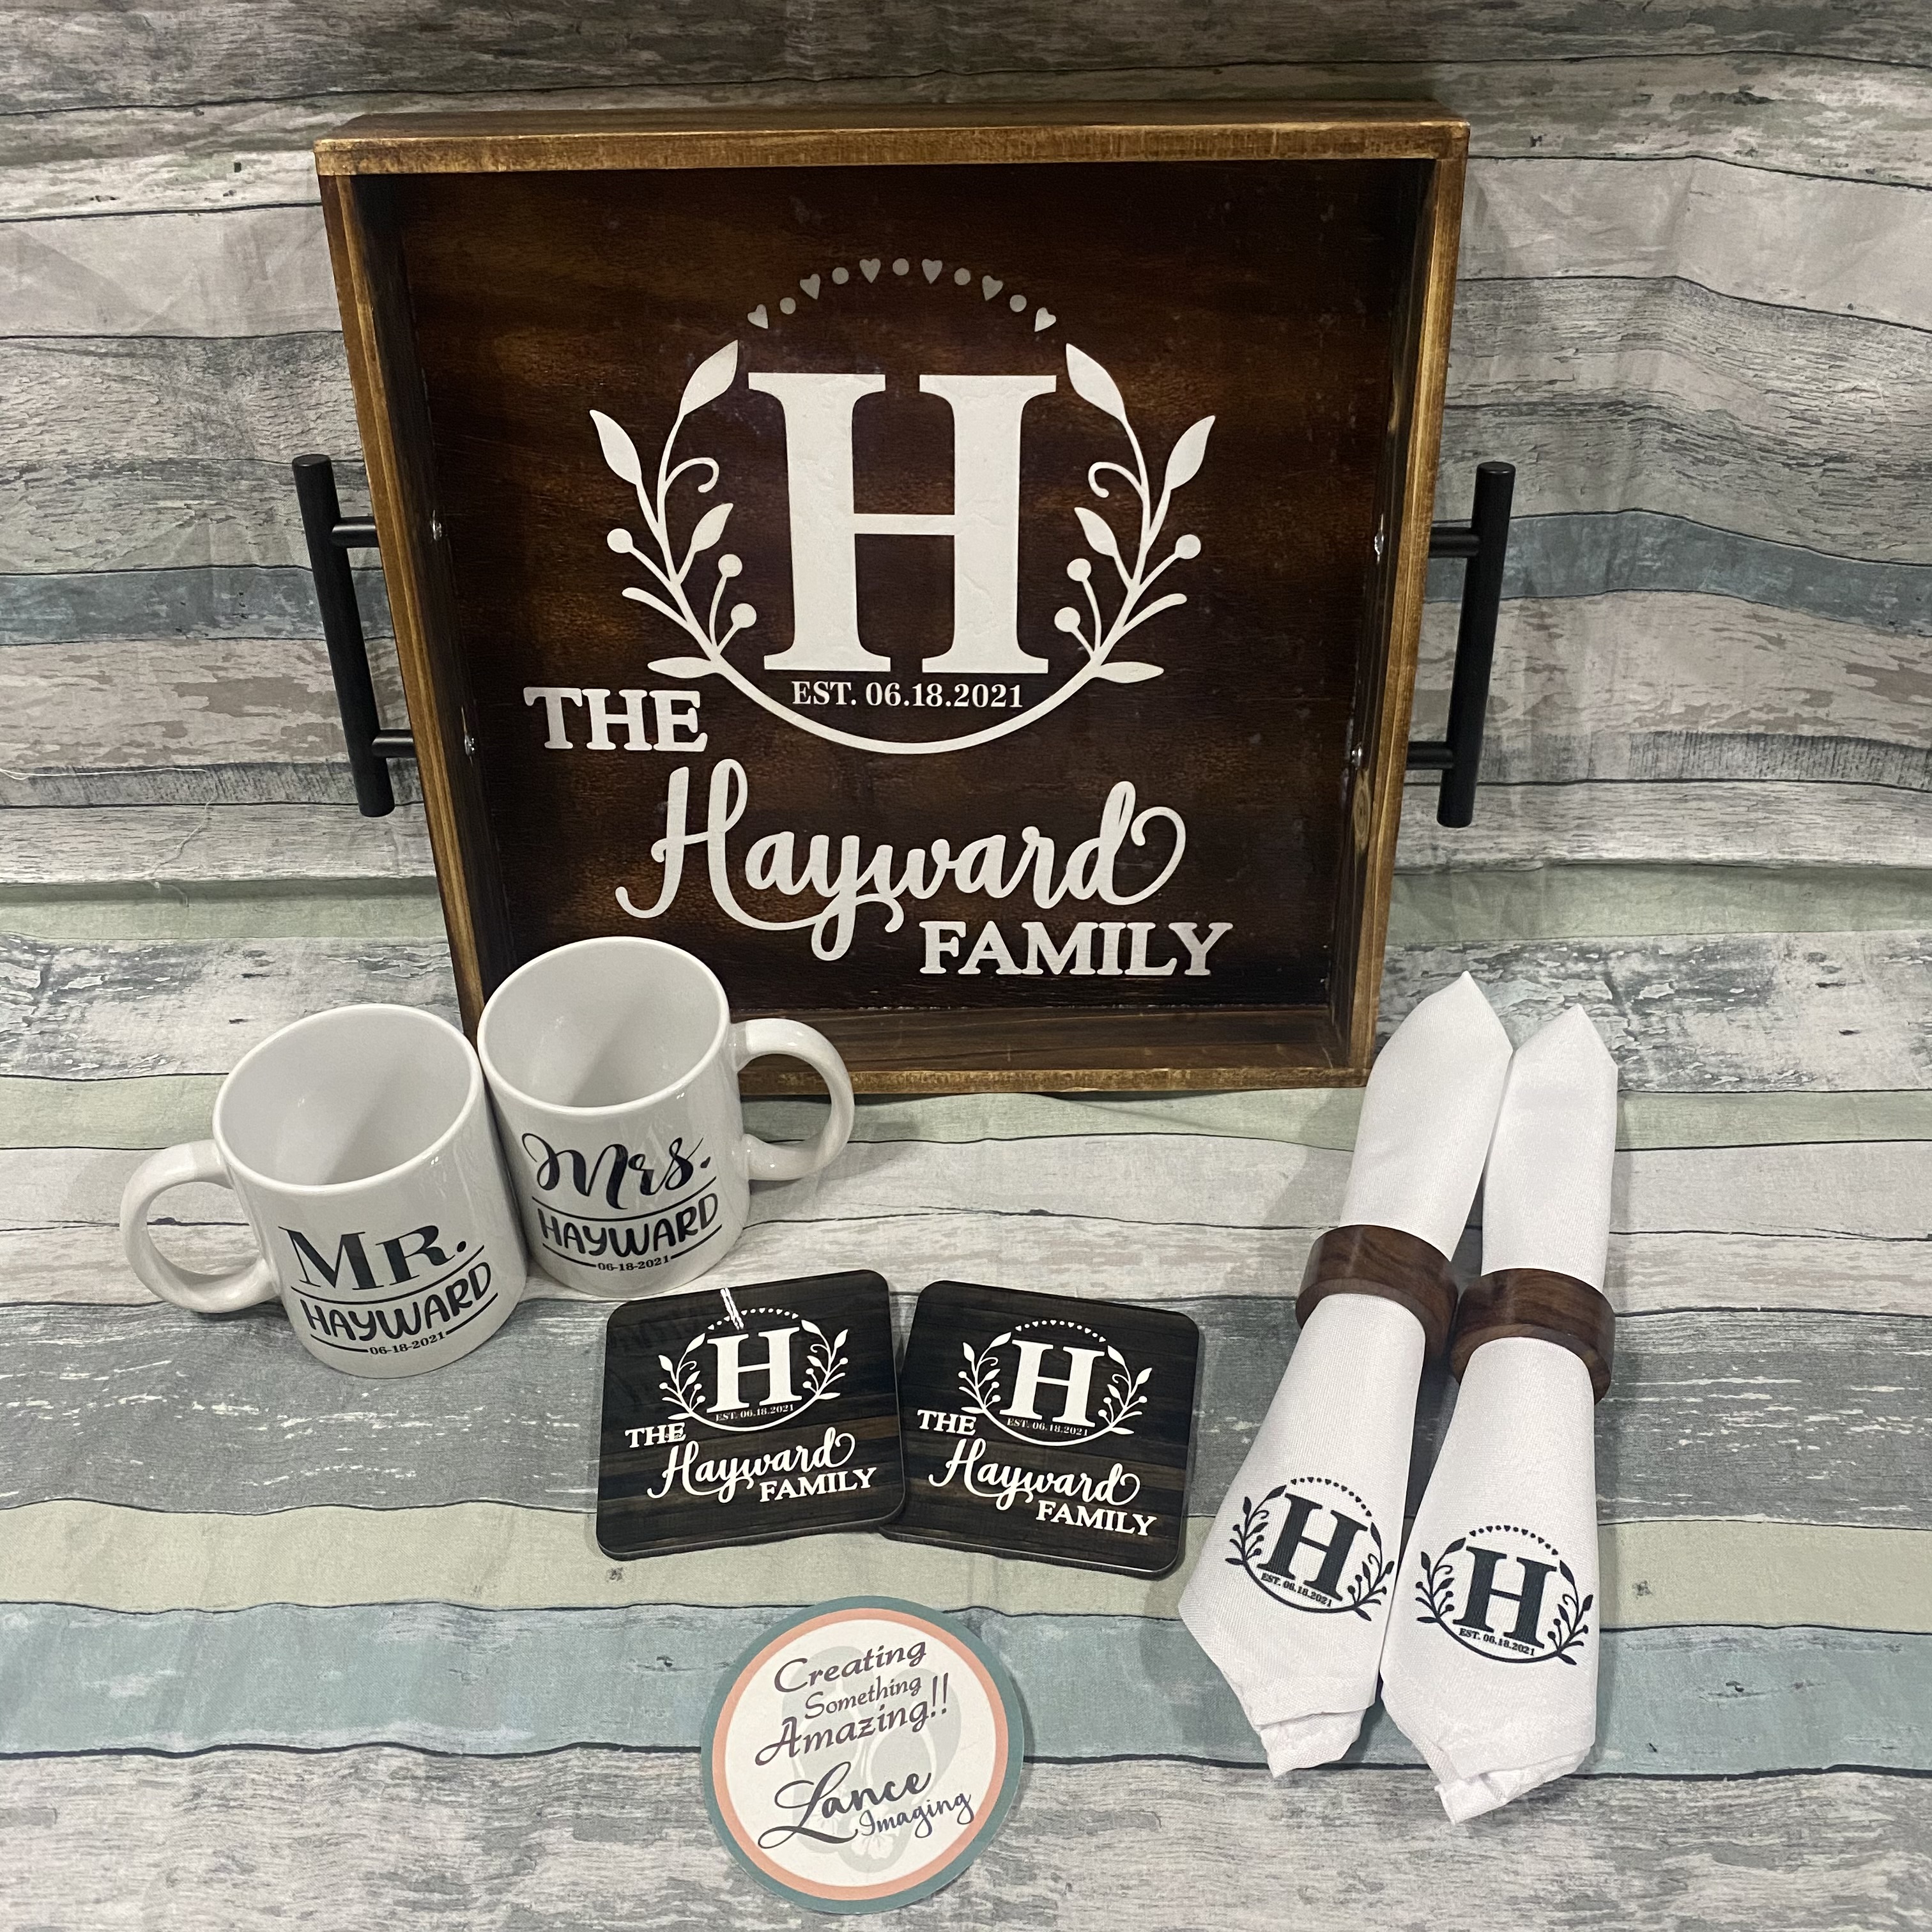 Carry tray with his and hers mugs, matching coasters and monogramed napkins